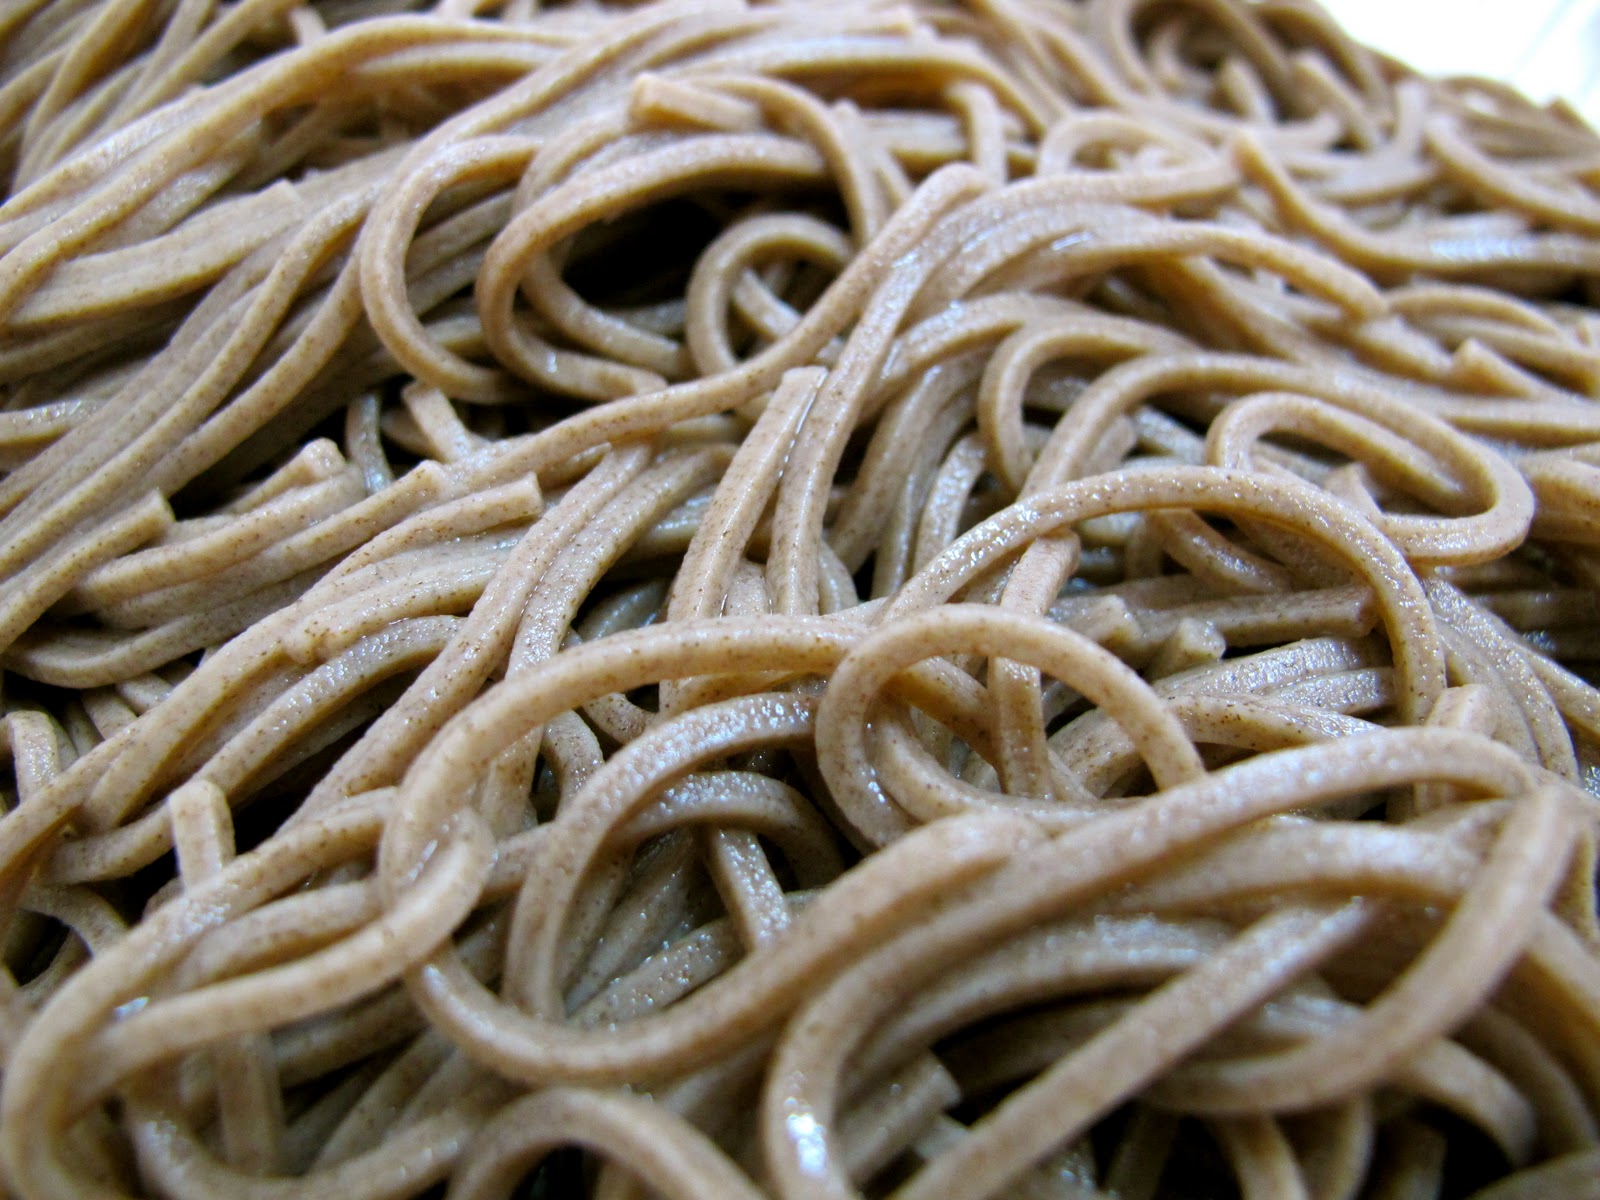 Knifing Forking Spooning: Cold Soba Noodles with Dipping Sauce (Zaru Soba)